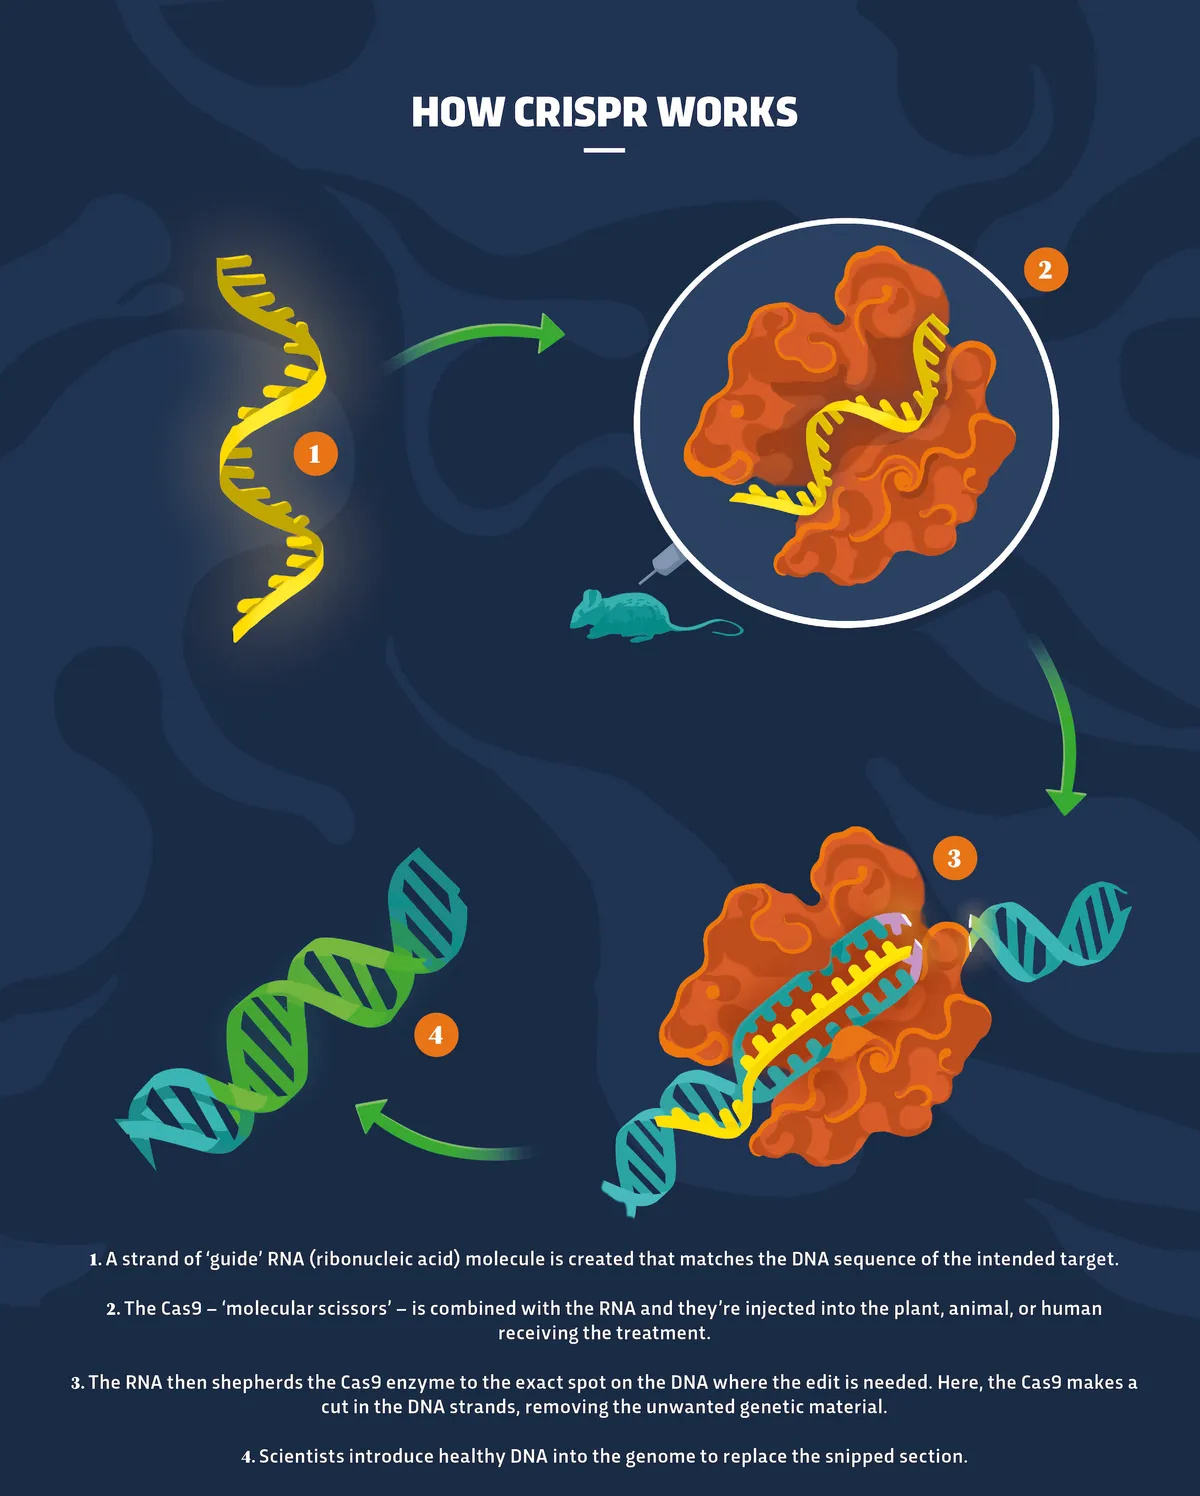 How CRISPR works - an infographic by Sam Falconer, web